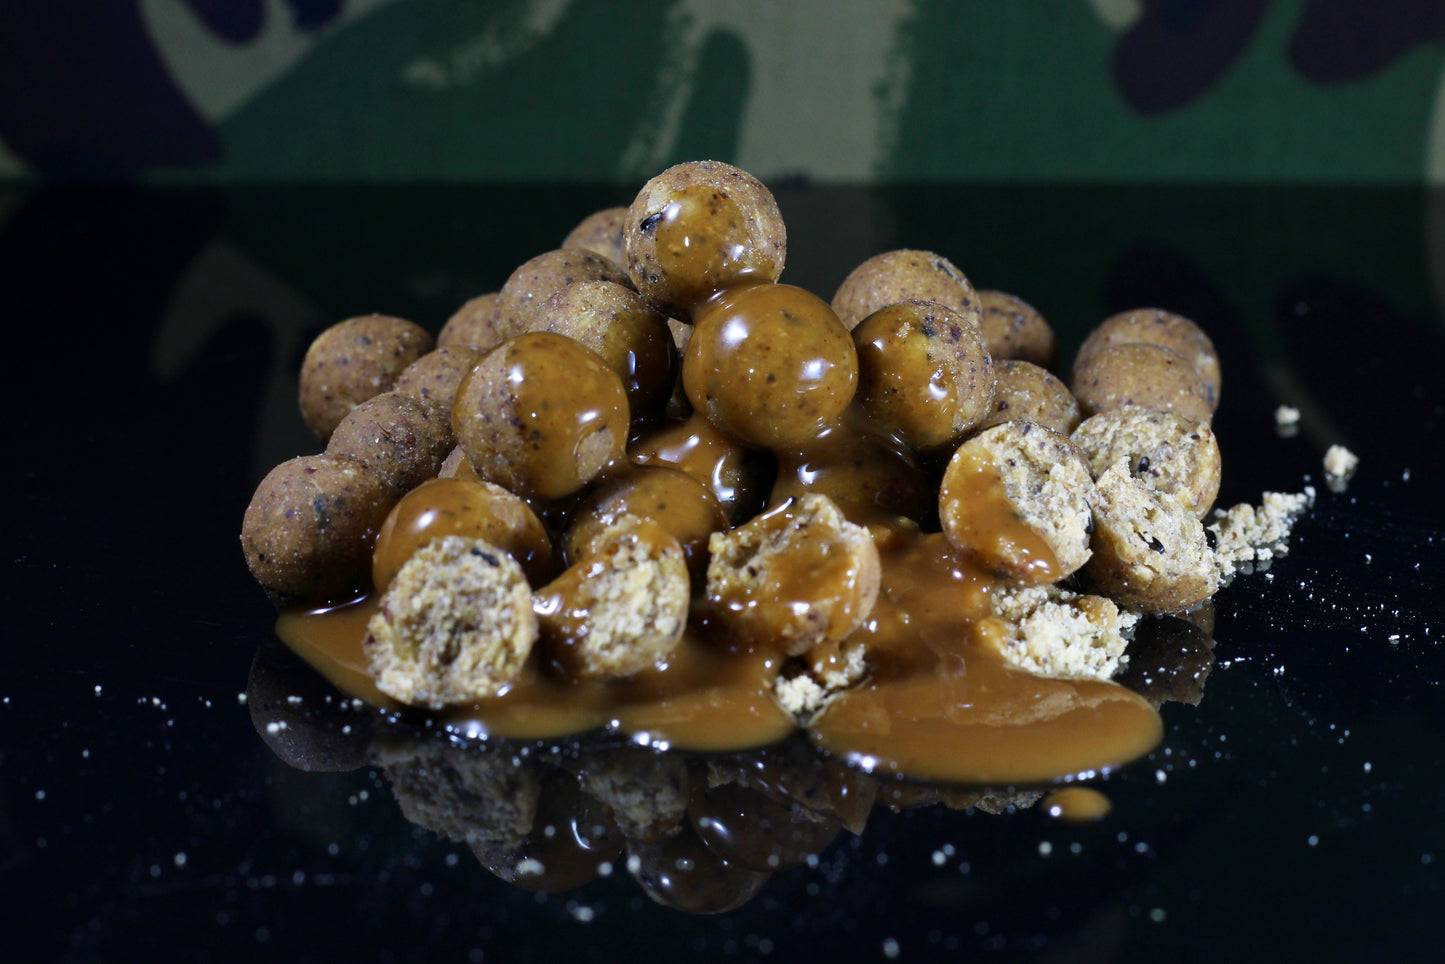 The NUTS Boilies